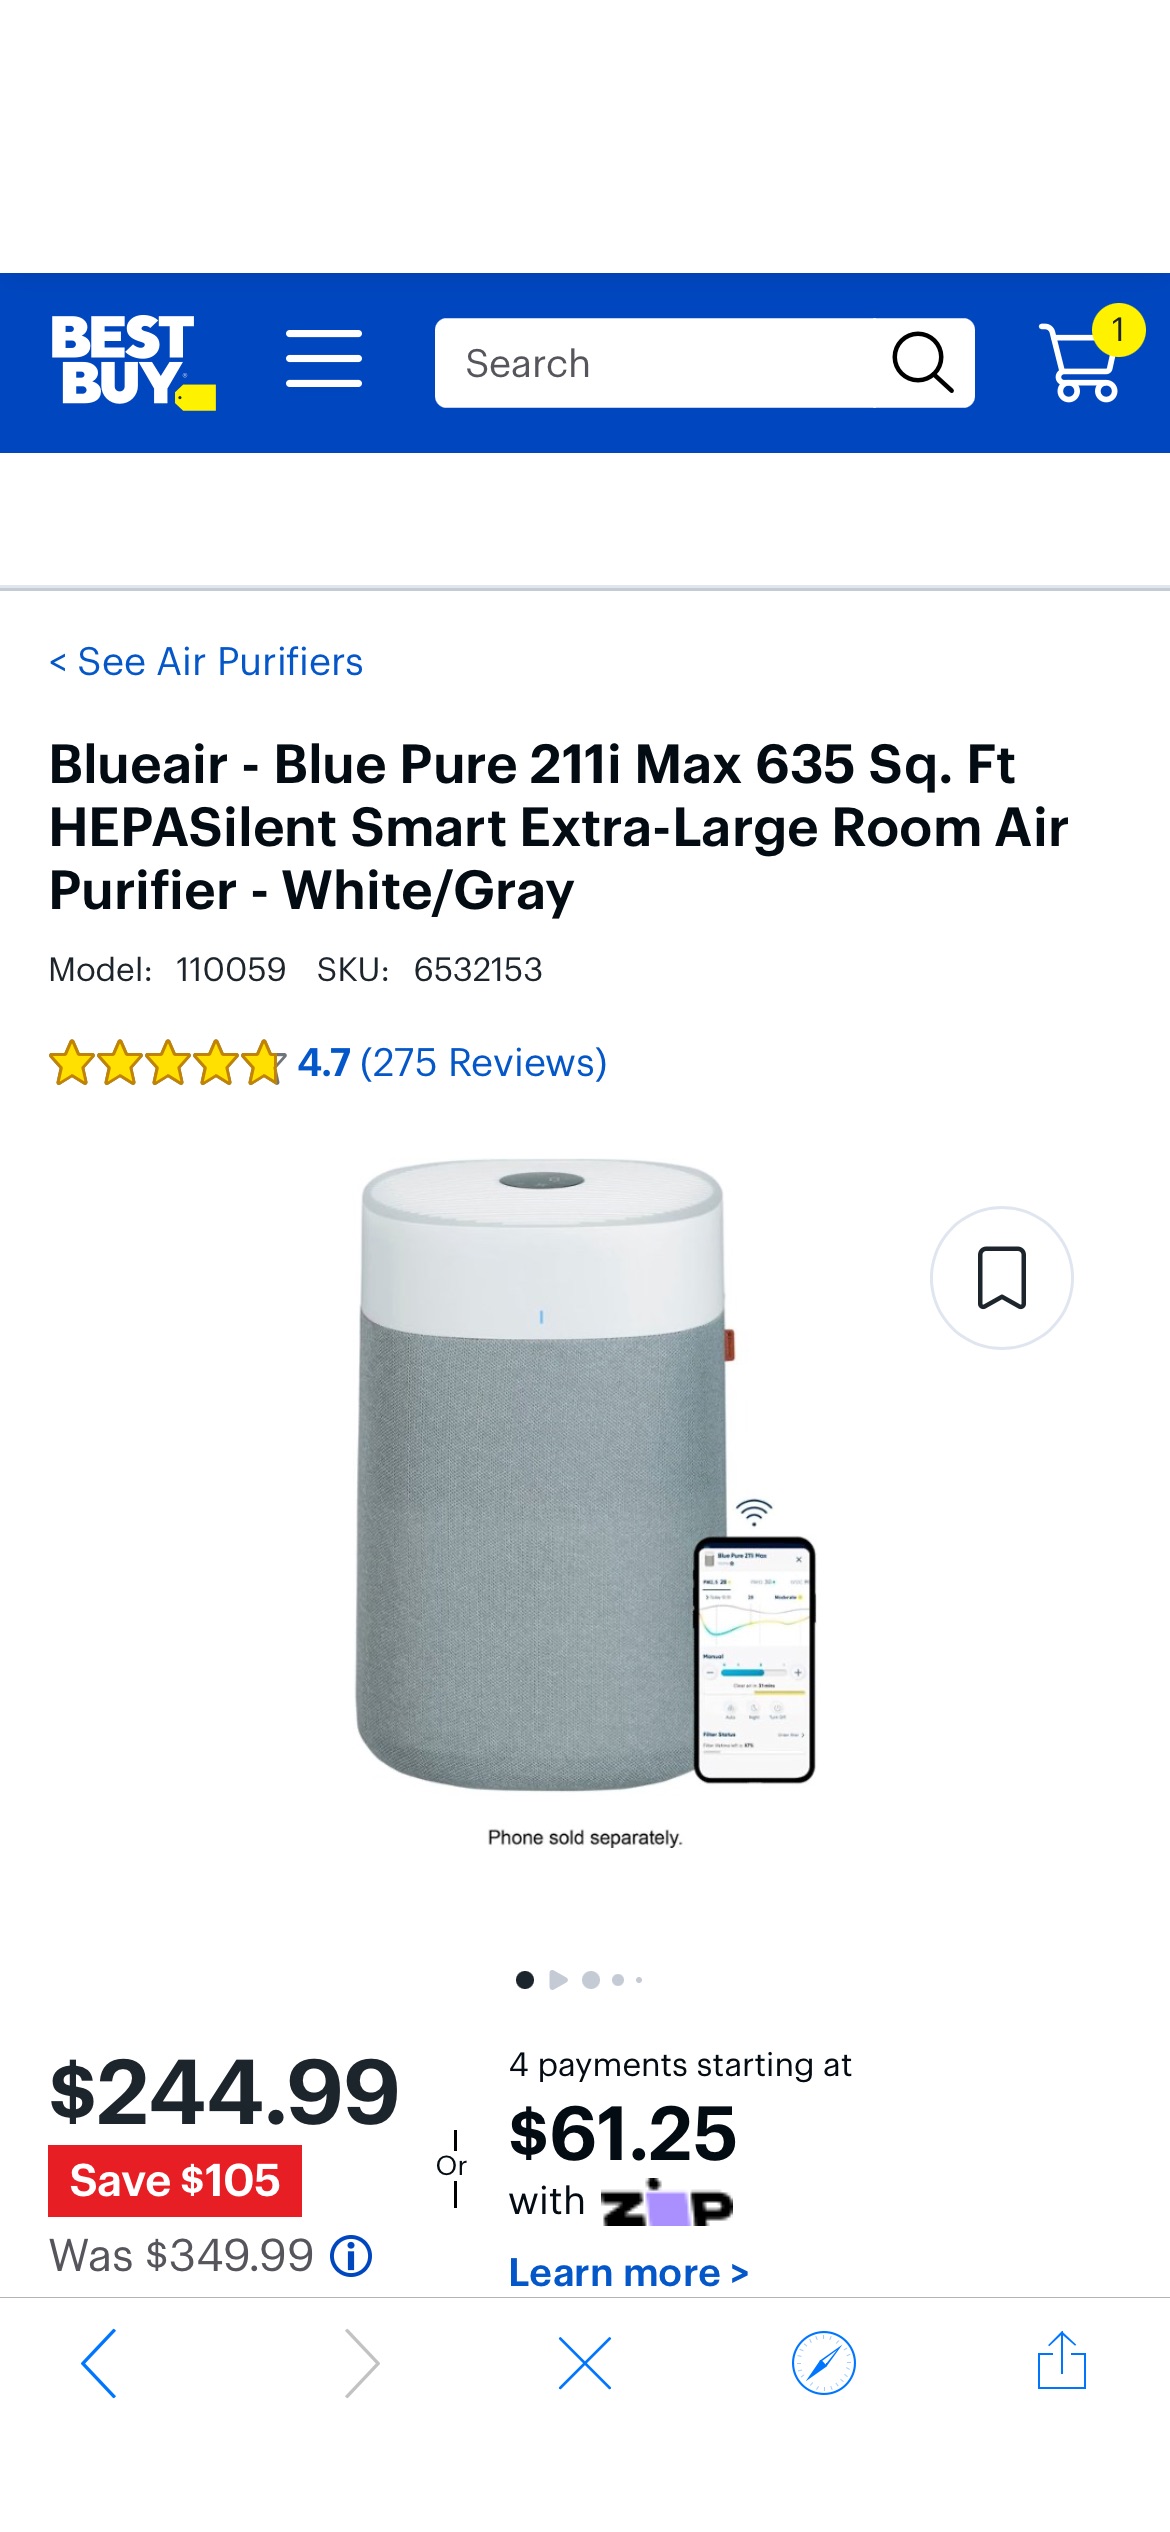 Blueair Blue Pure 211i Max 635 Sq. Ft HEPASilent Smart Extra-Large Room Air Purifier White/Gray 110059 - Best Buy